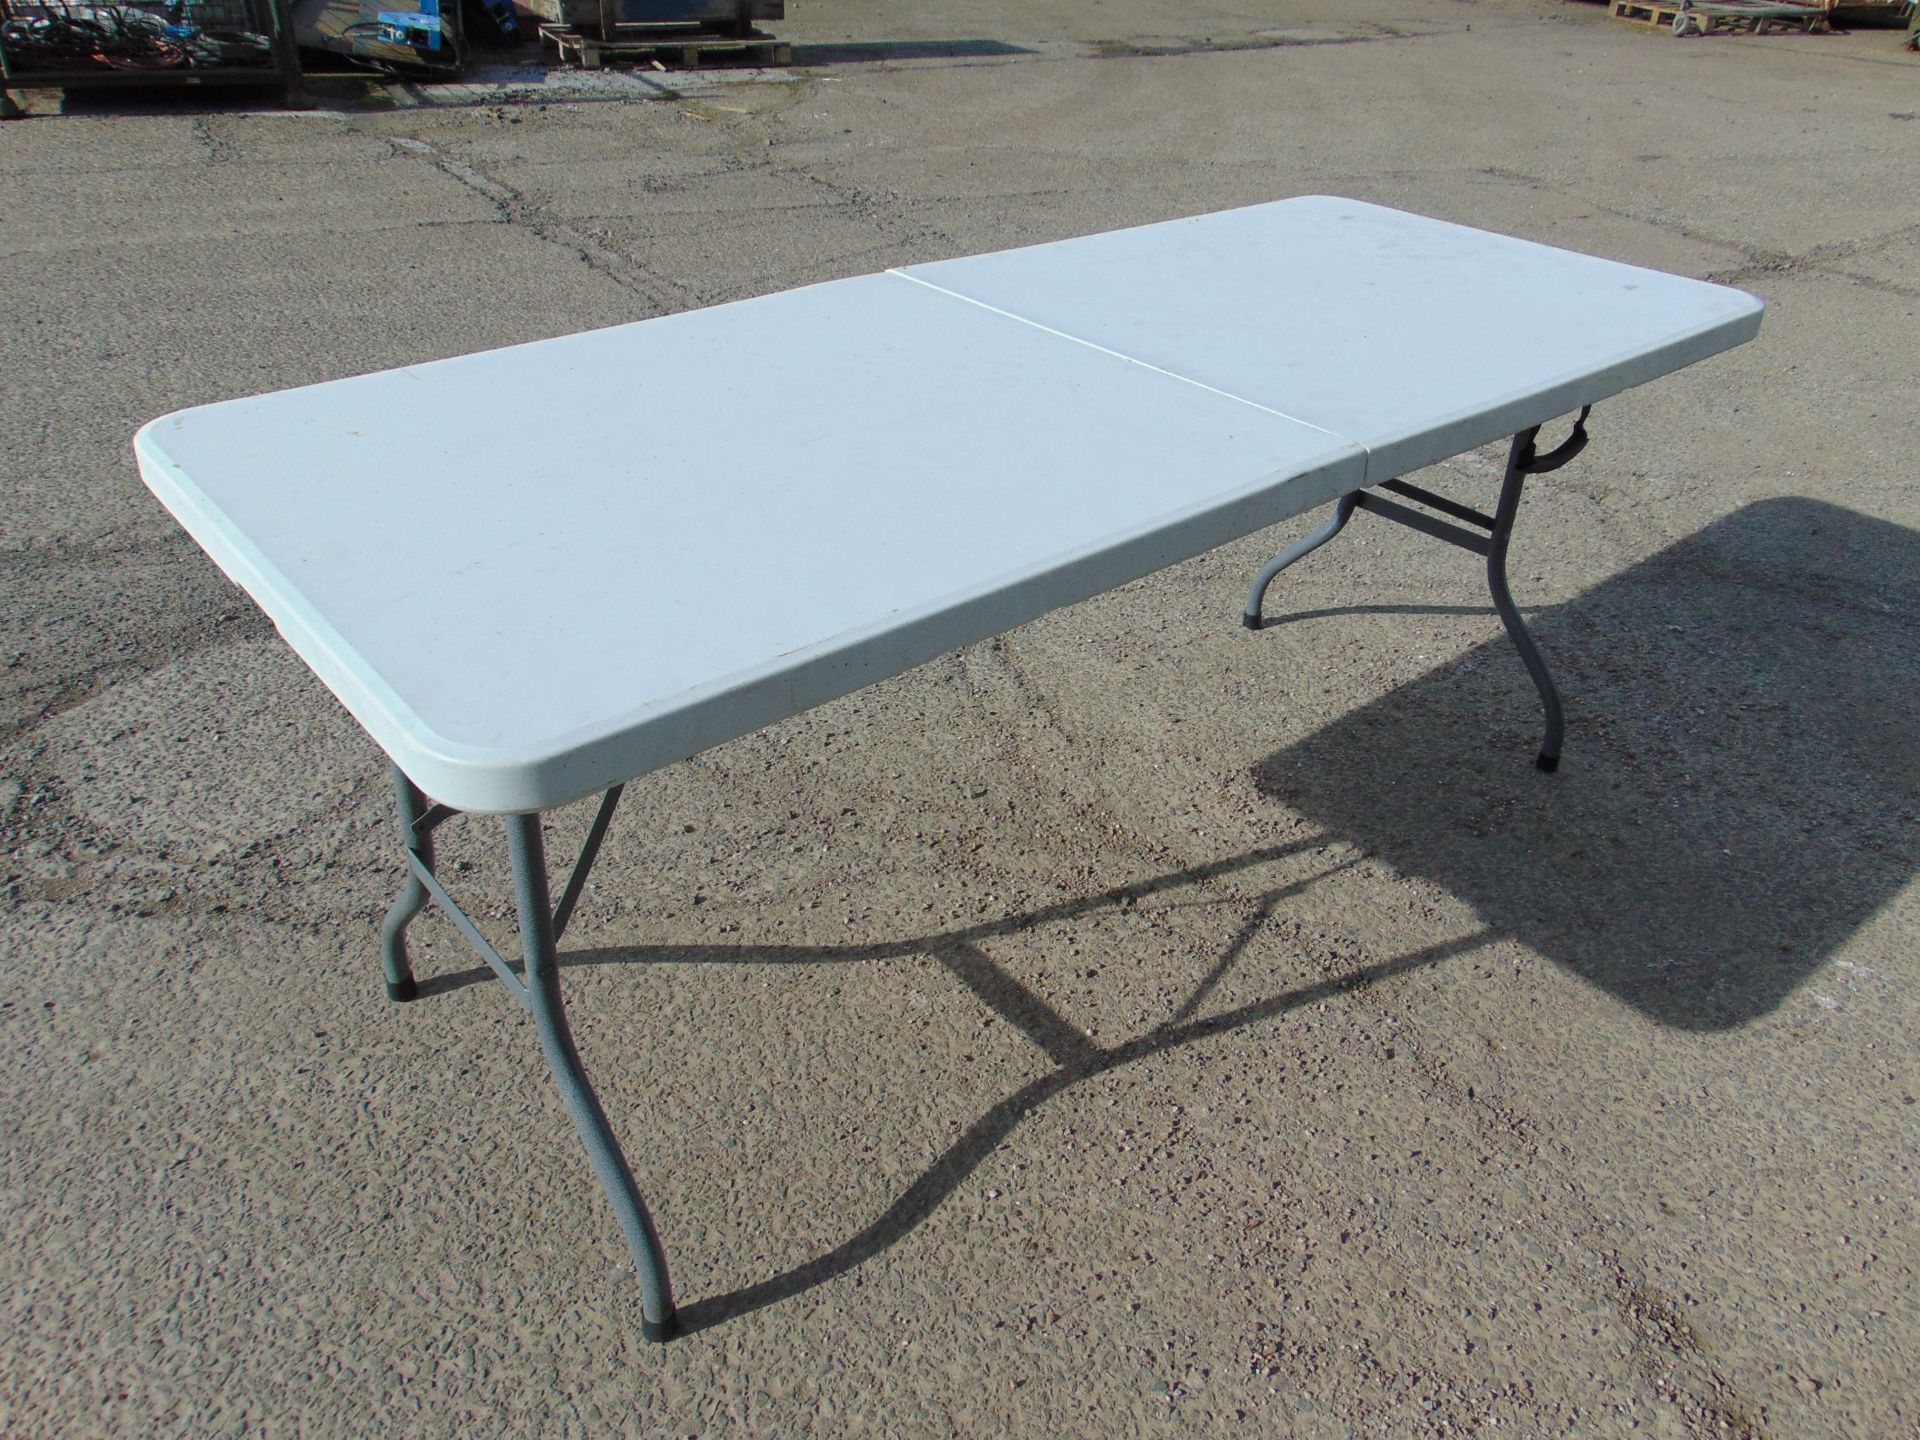 6ft Foldable Carry Camp Table